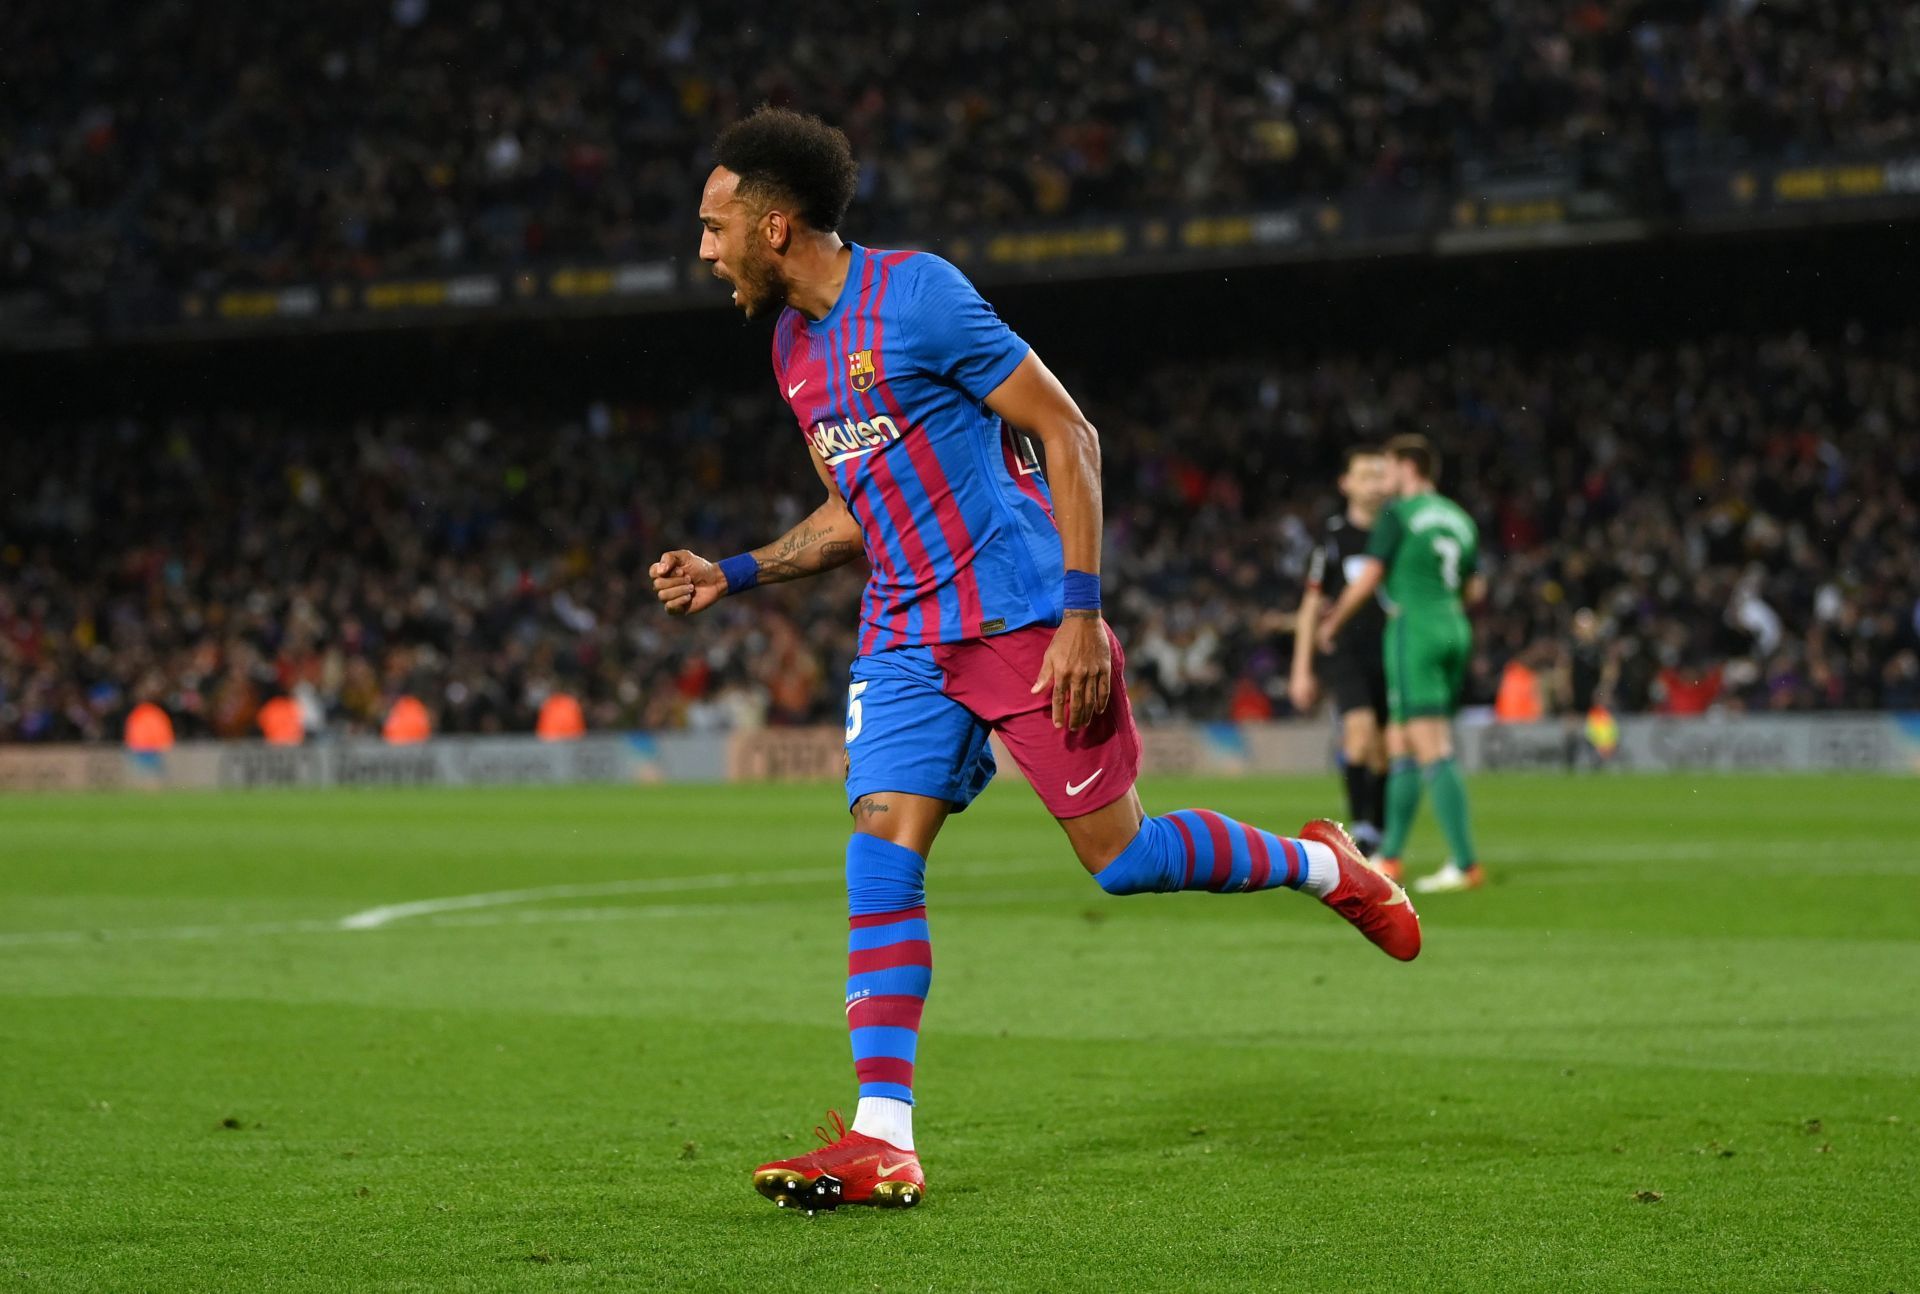 Pierre-Emerick Aubameyang has been in fine form for the Blaugrana since his move from Arsenal